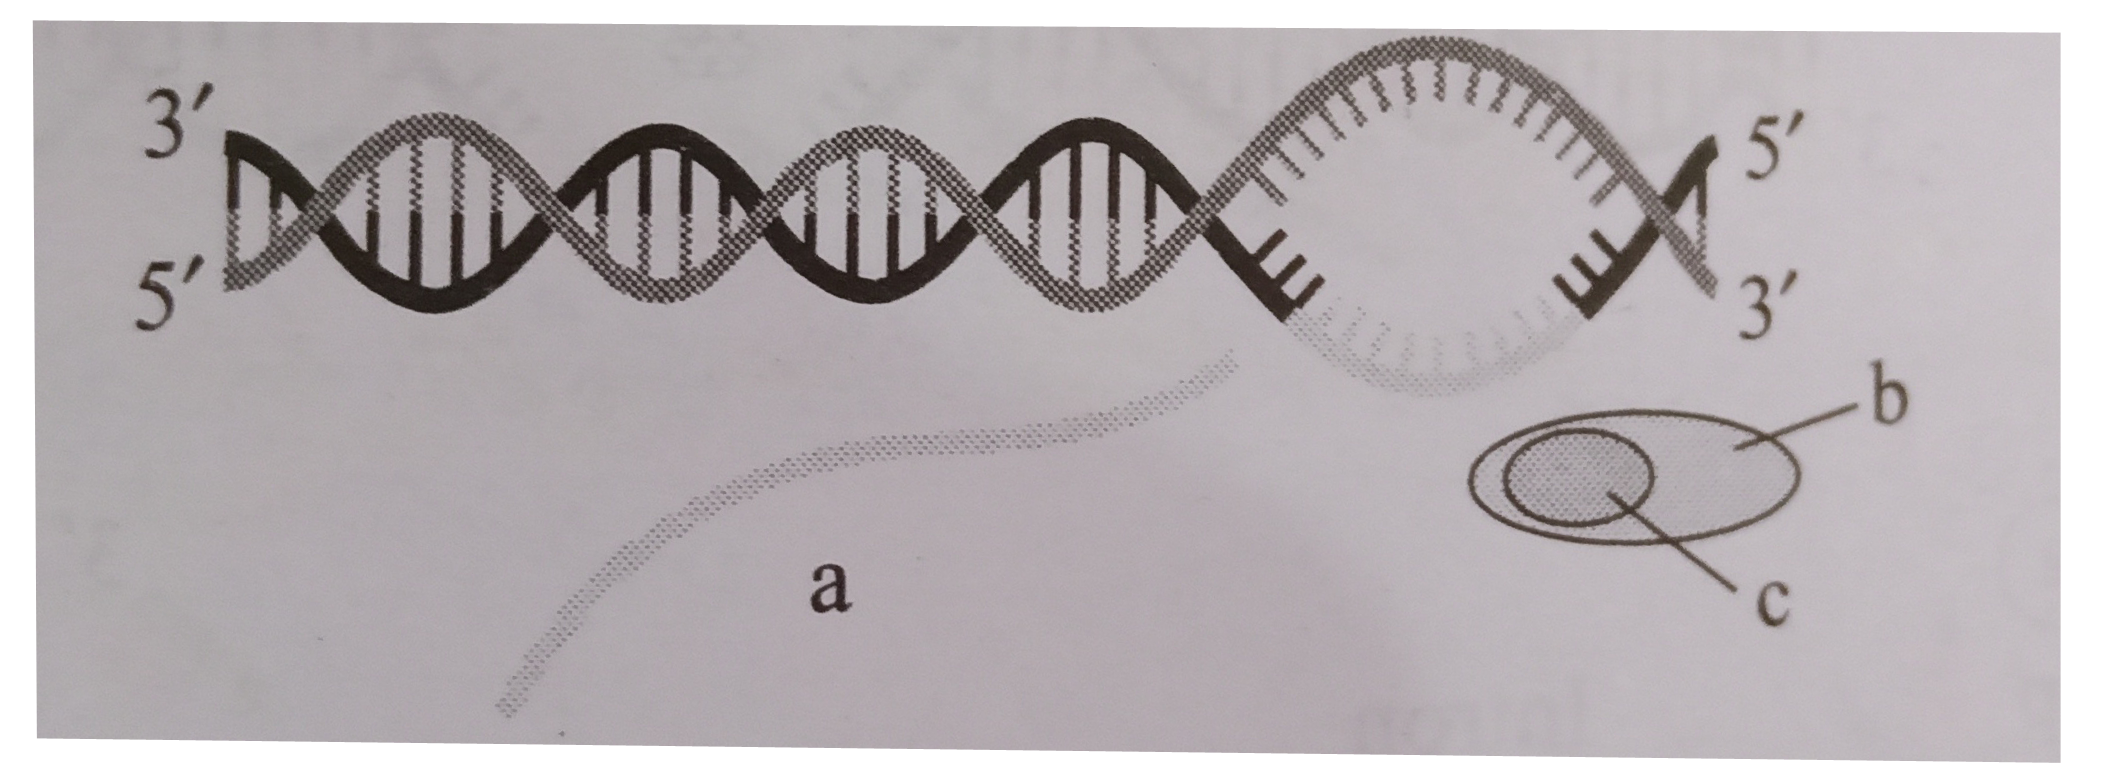 The given figure represents the process of transcription in bacteria      Select the option which correctly labels a, b and c